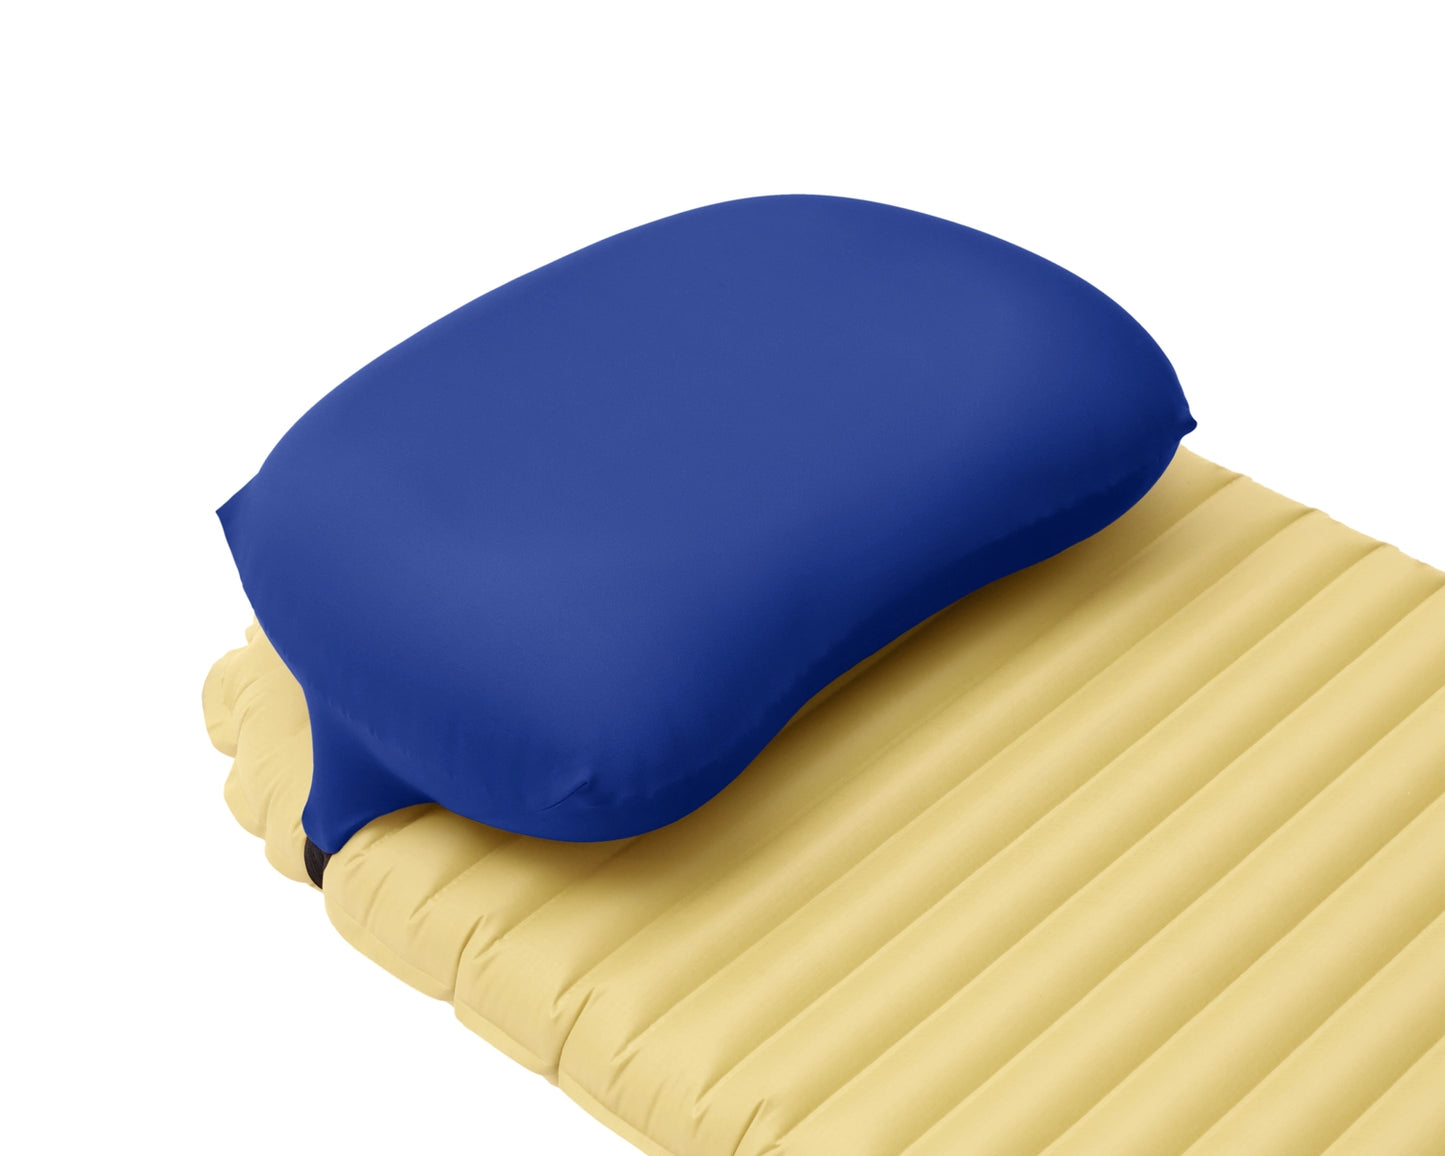 Pillow Strap medium in blue side view. Backpacking pillowcase for attaching to a sleeping pad for better sleep camping.